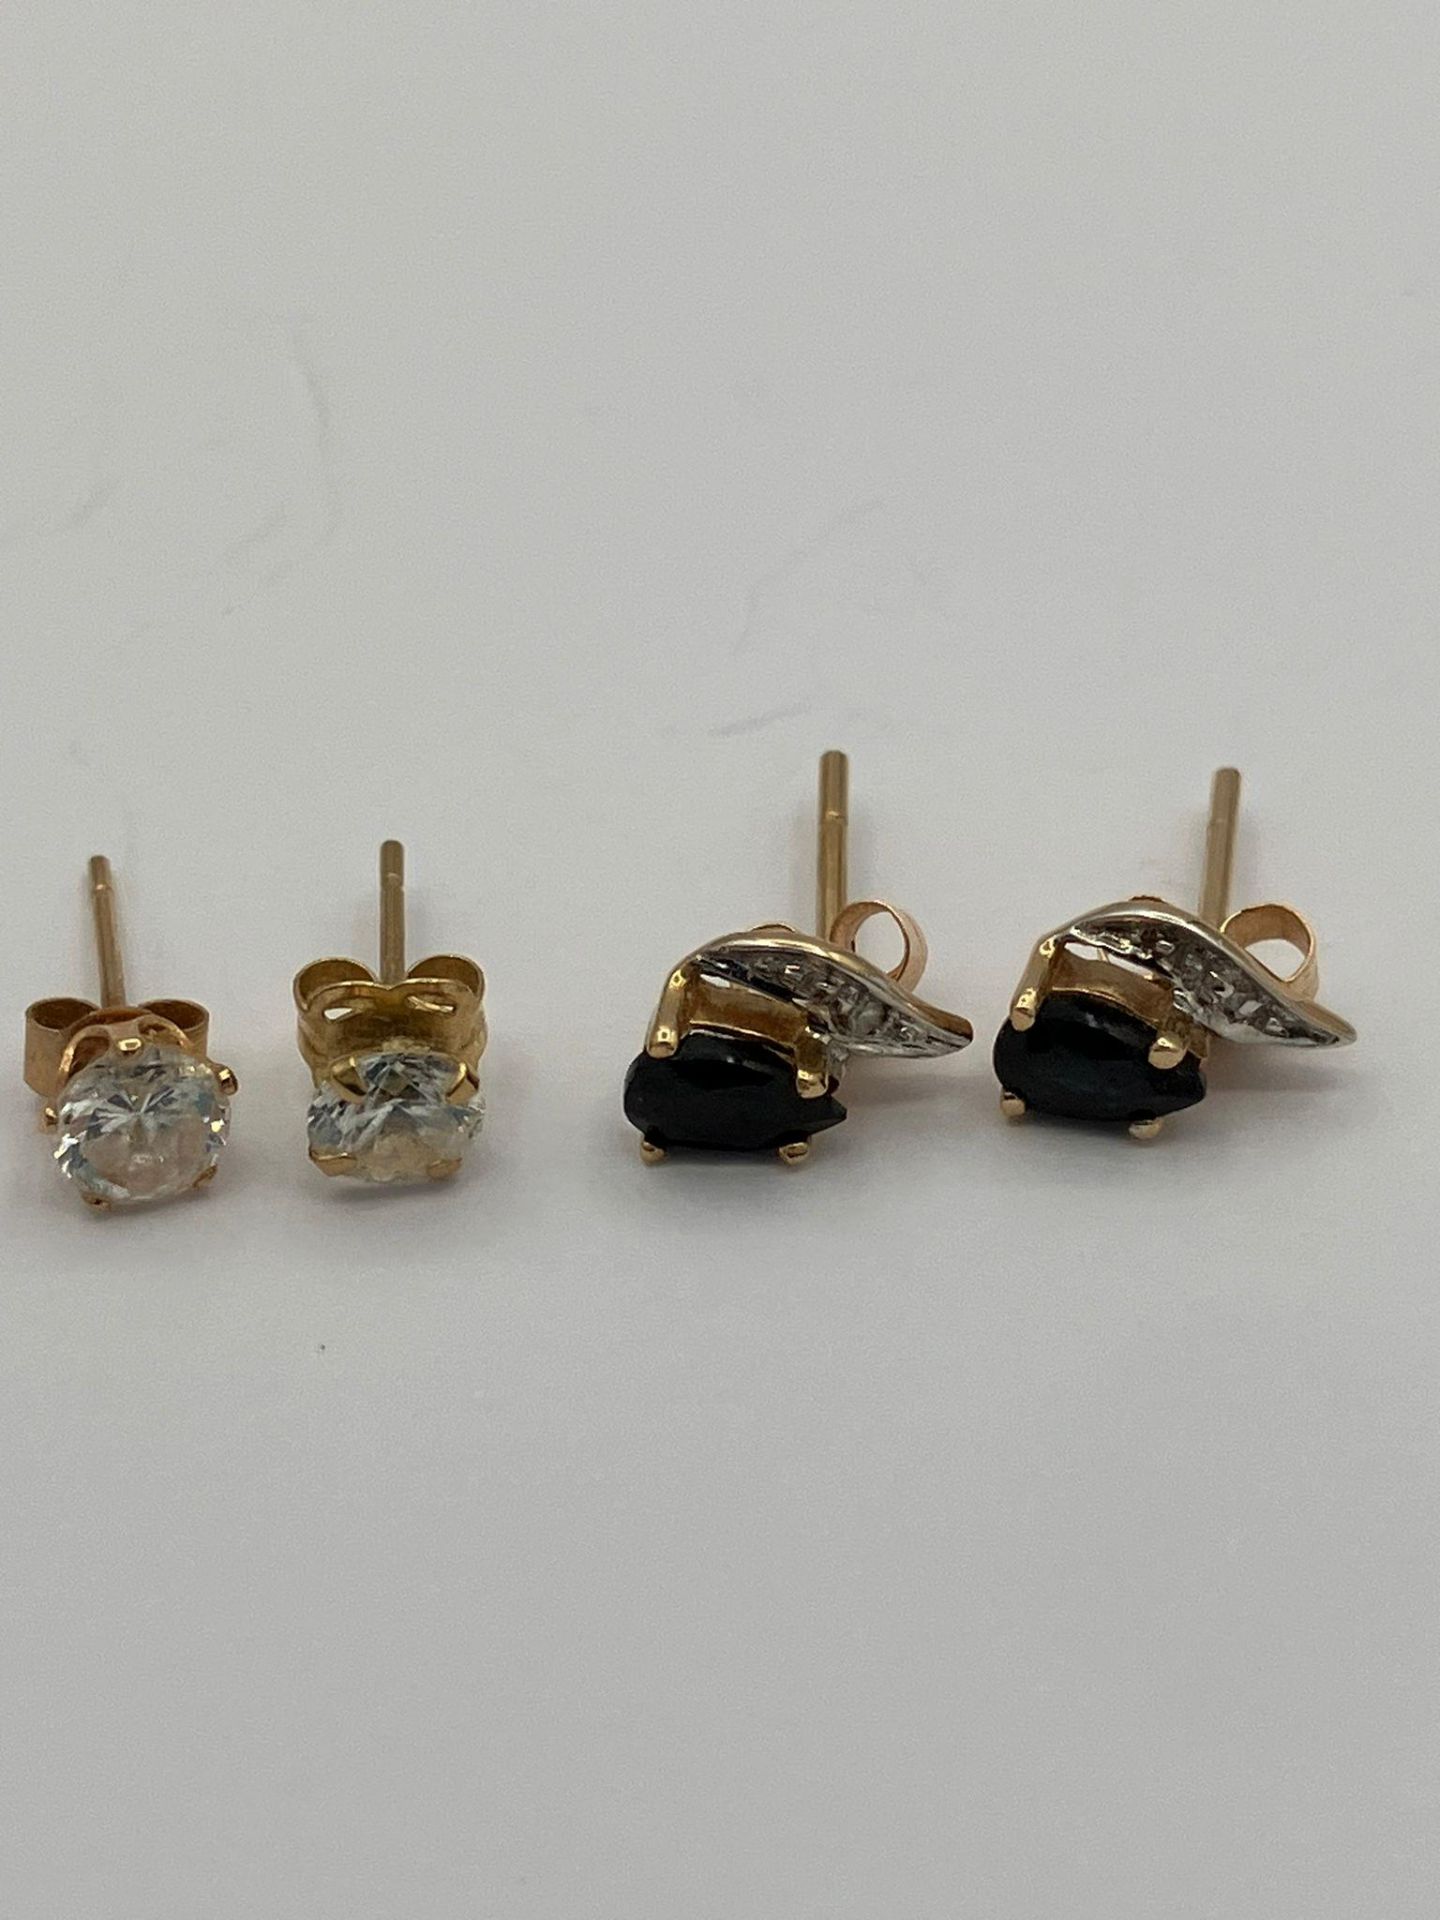 2 x pairs GEM SET 9 carat GOLD STUD EARRINGS. Both pairs complete with gold backs. 1.1 grams. - Image 2 of 2